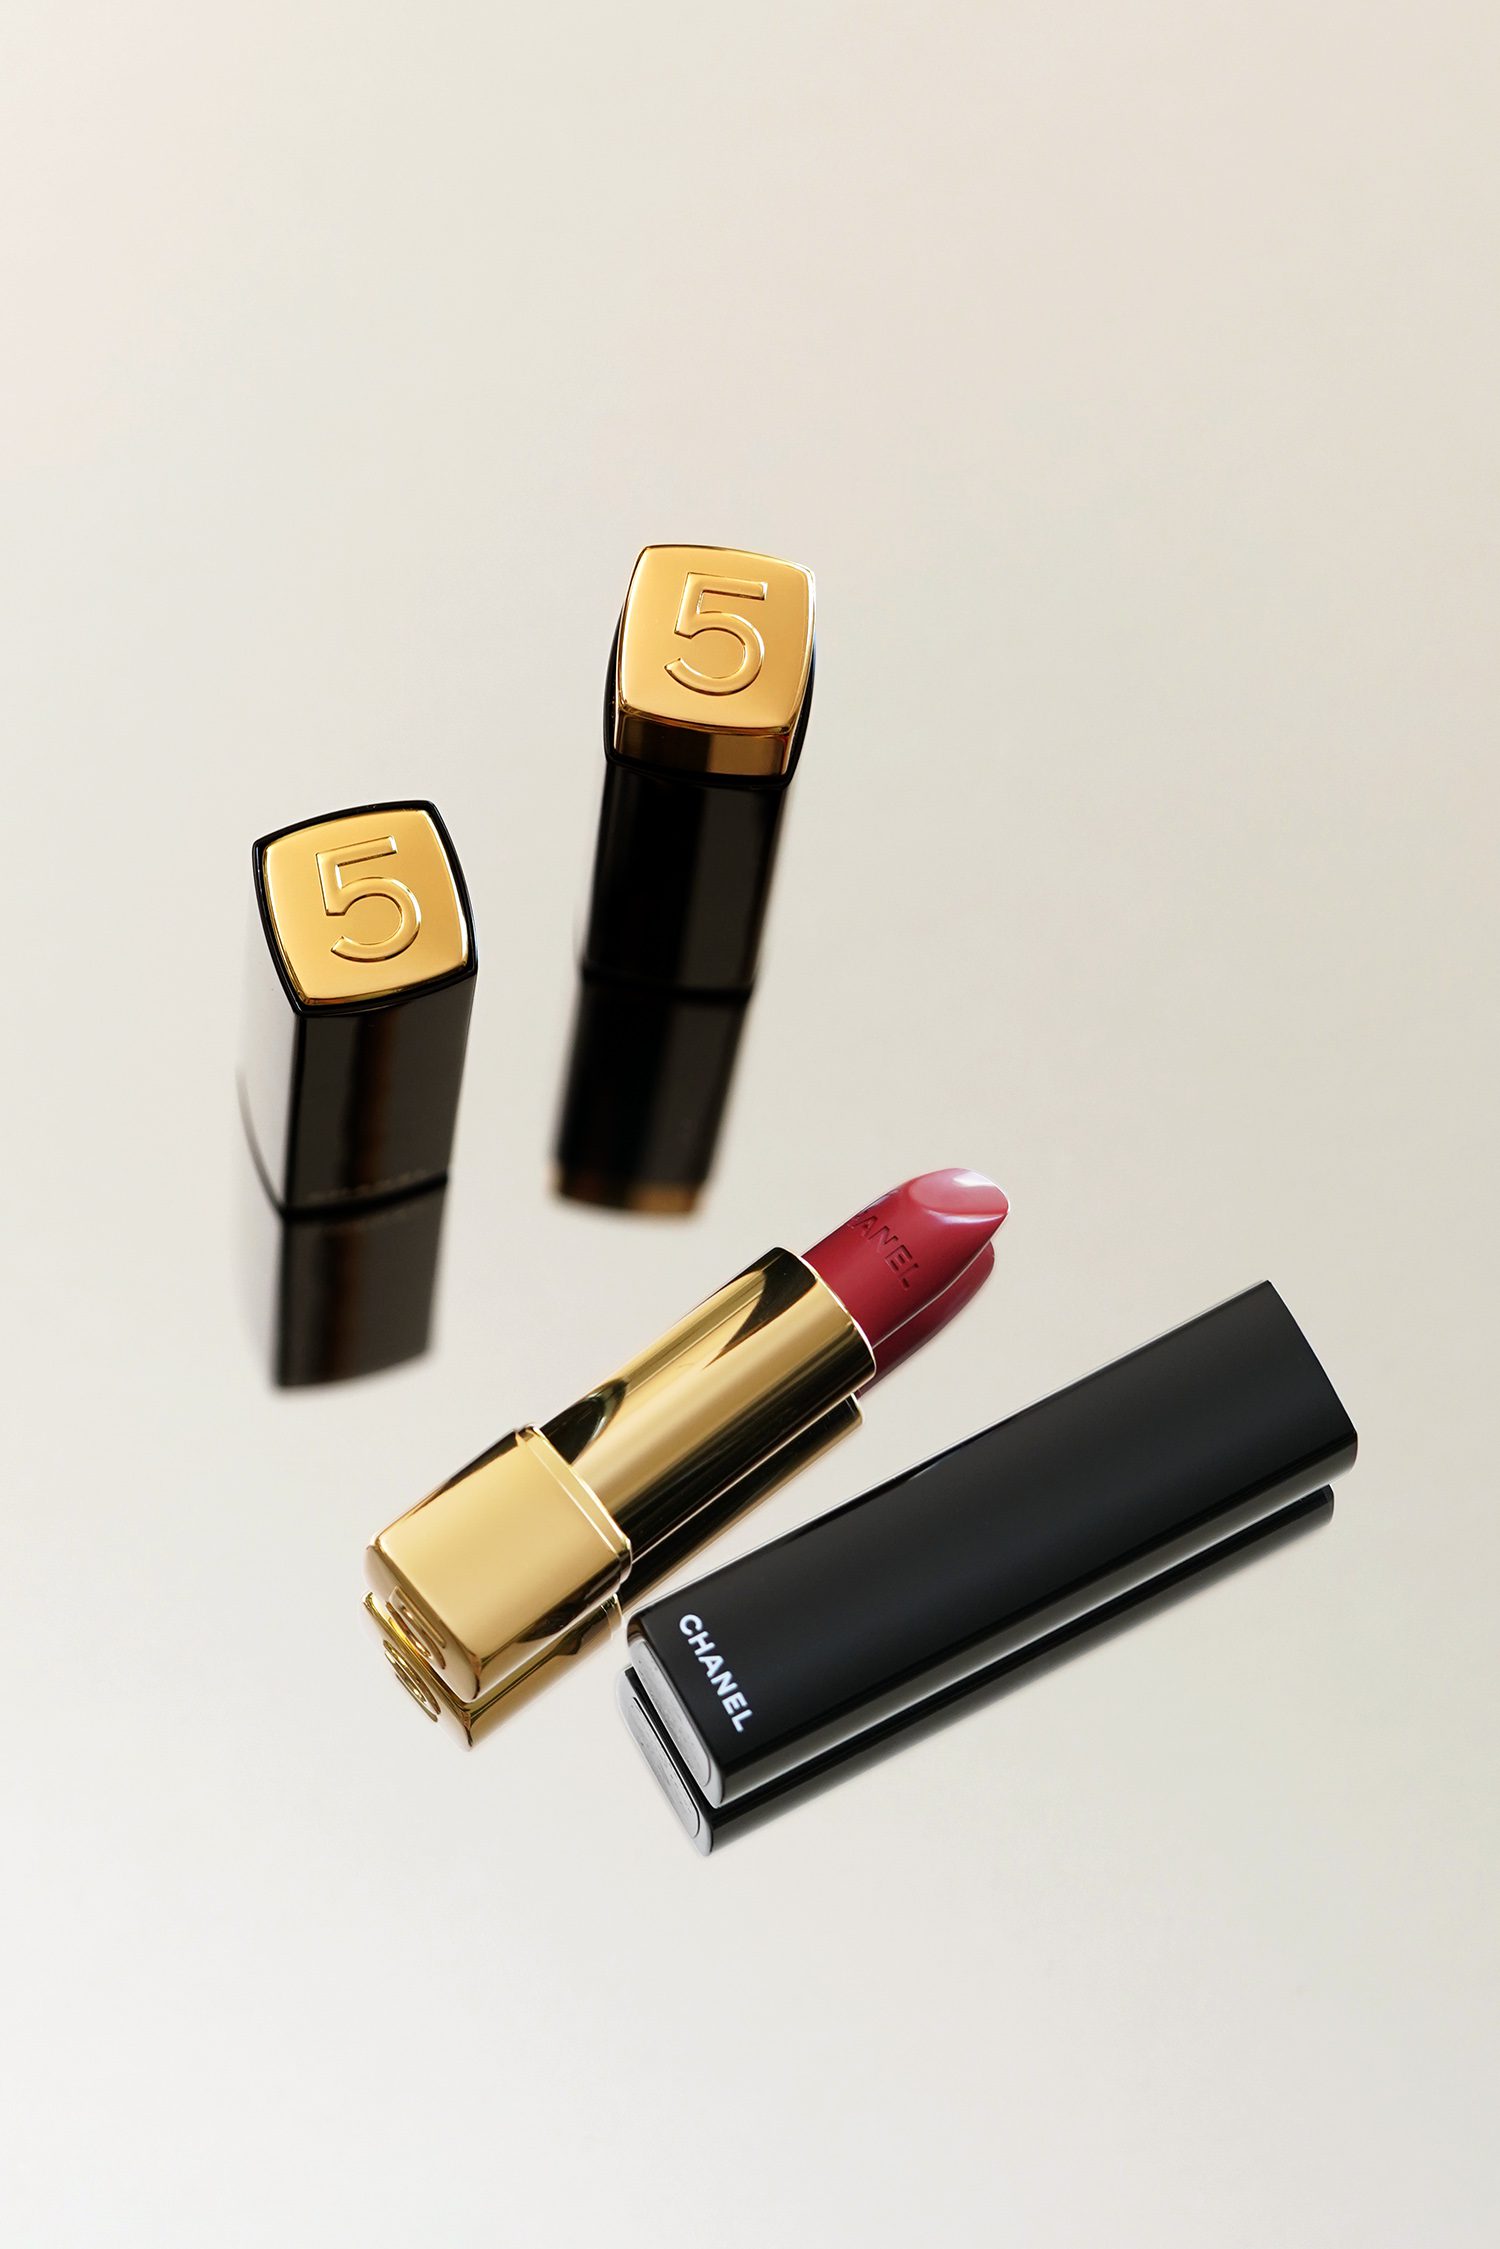 Chanel Limited Edition Rouge Allure set